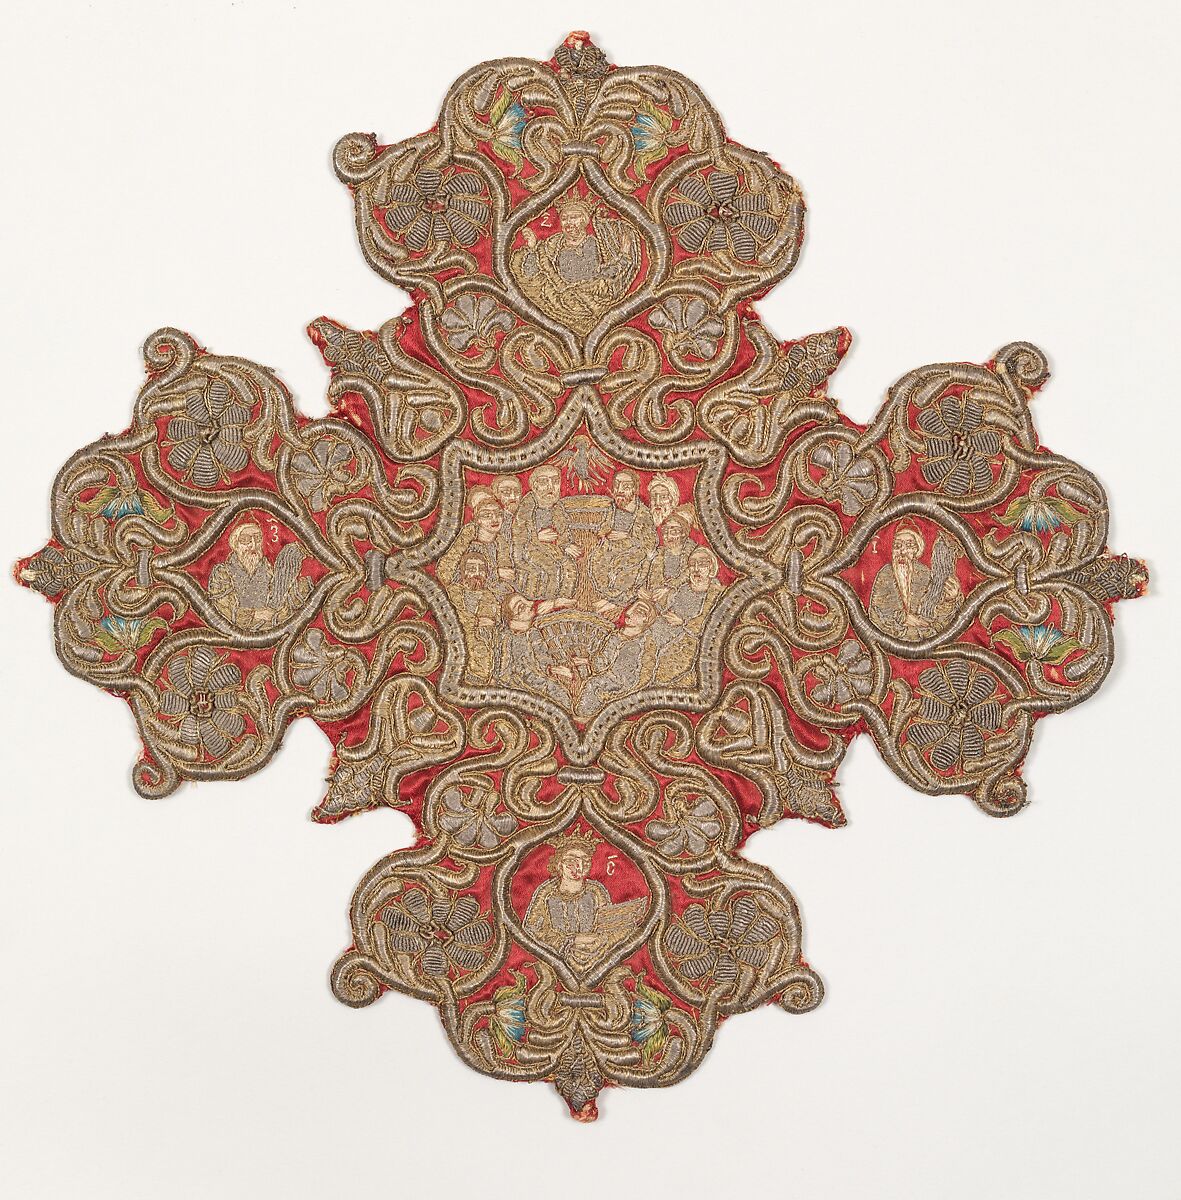 Embroidered cross from an Omophorion, Silk and metal thread embroidery on a foundation of silk satin backed with linen plain weave, Ottoman 